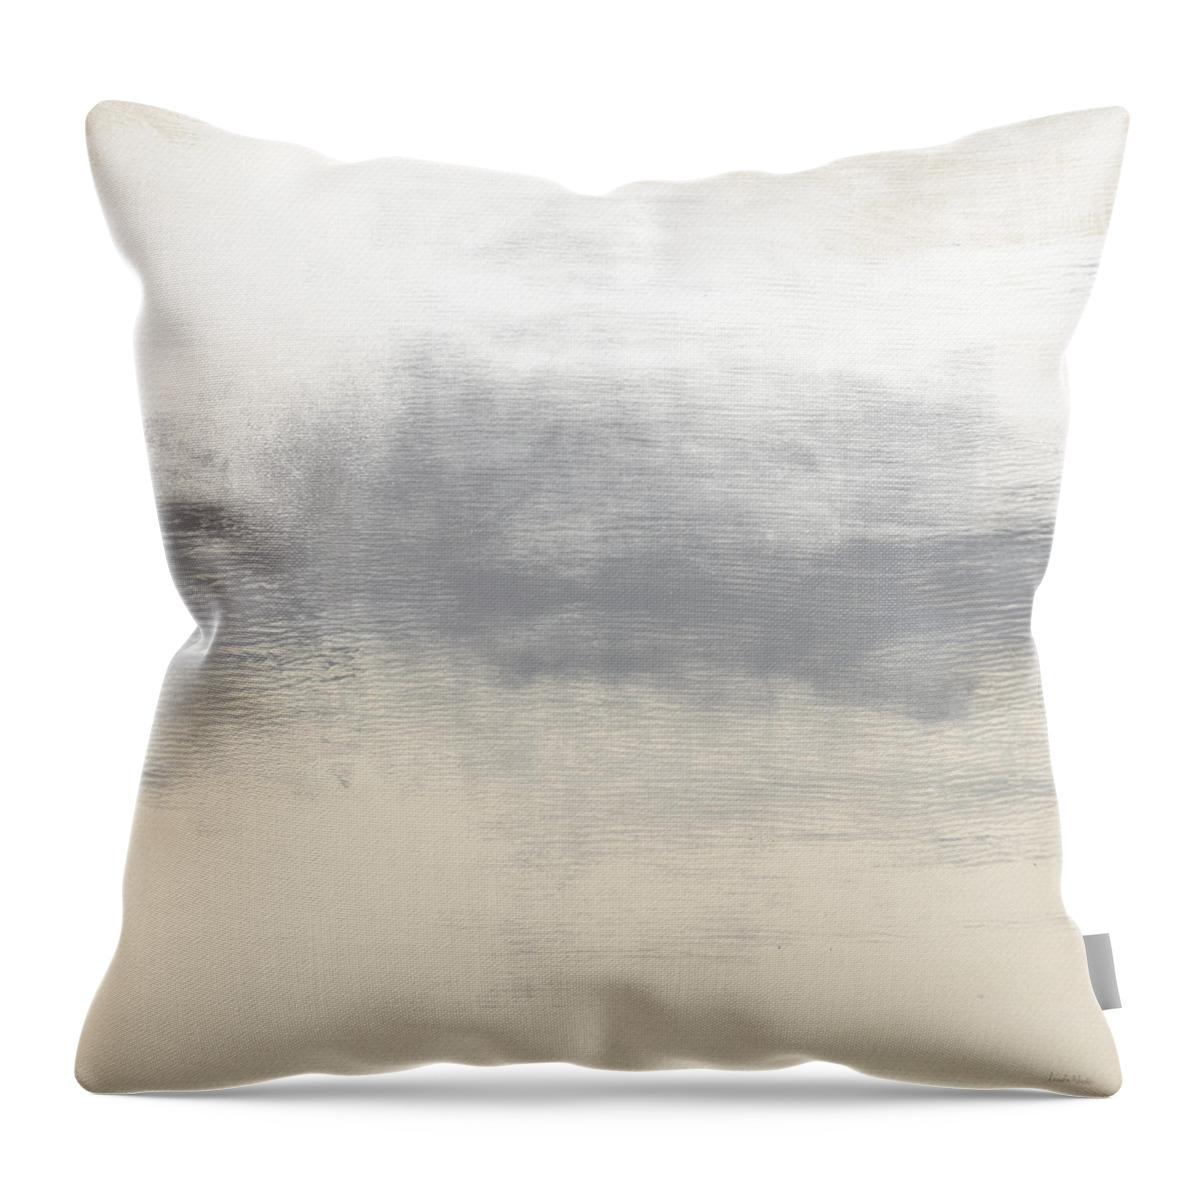 Abstract Throw Pillow featuring the painting Sand Swept- Abstract Art by Linda Woods by Linda Woods